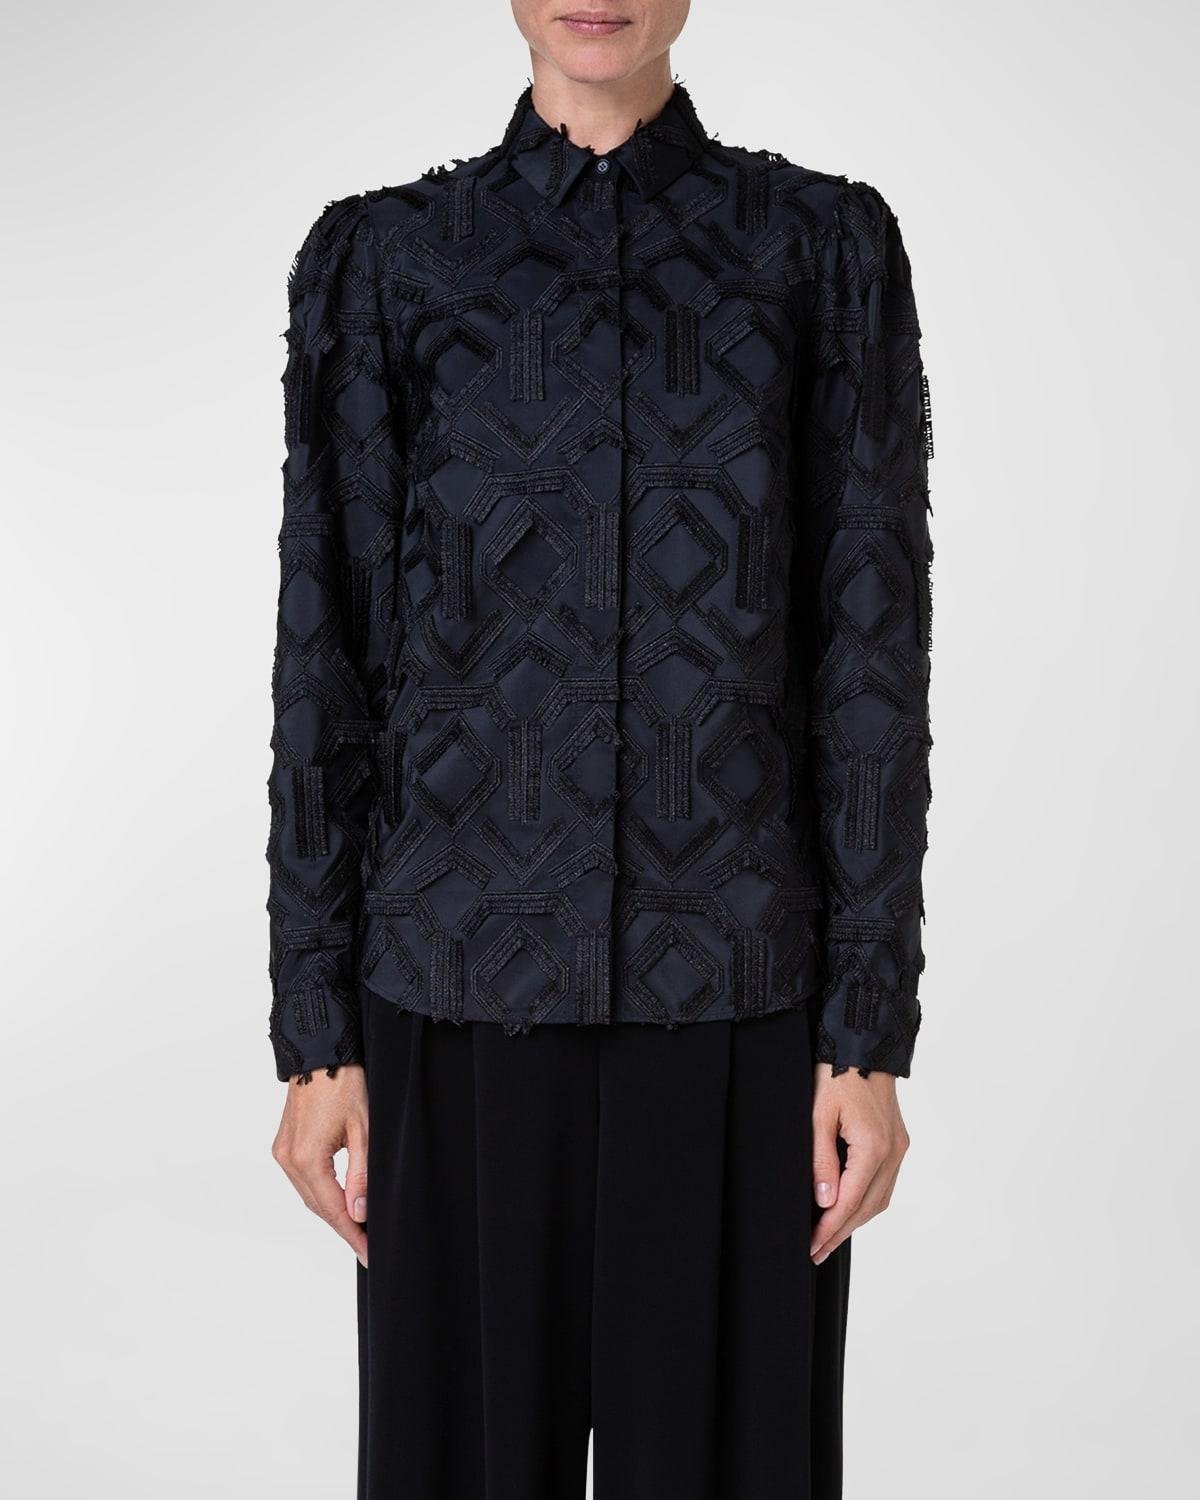 Embroidered Fringe Button-Front Blouse by AKRIS